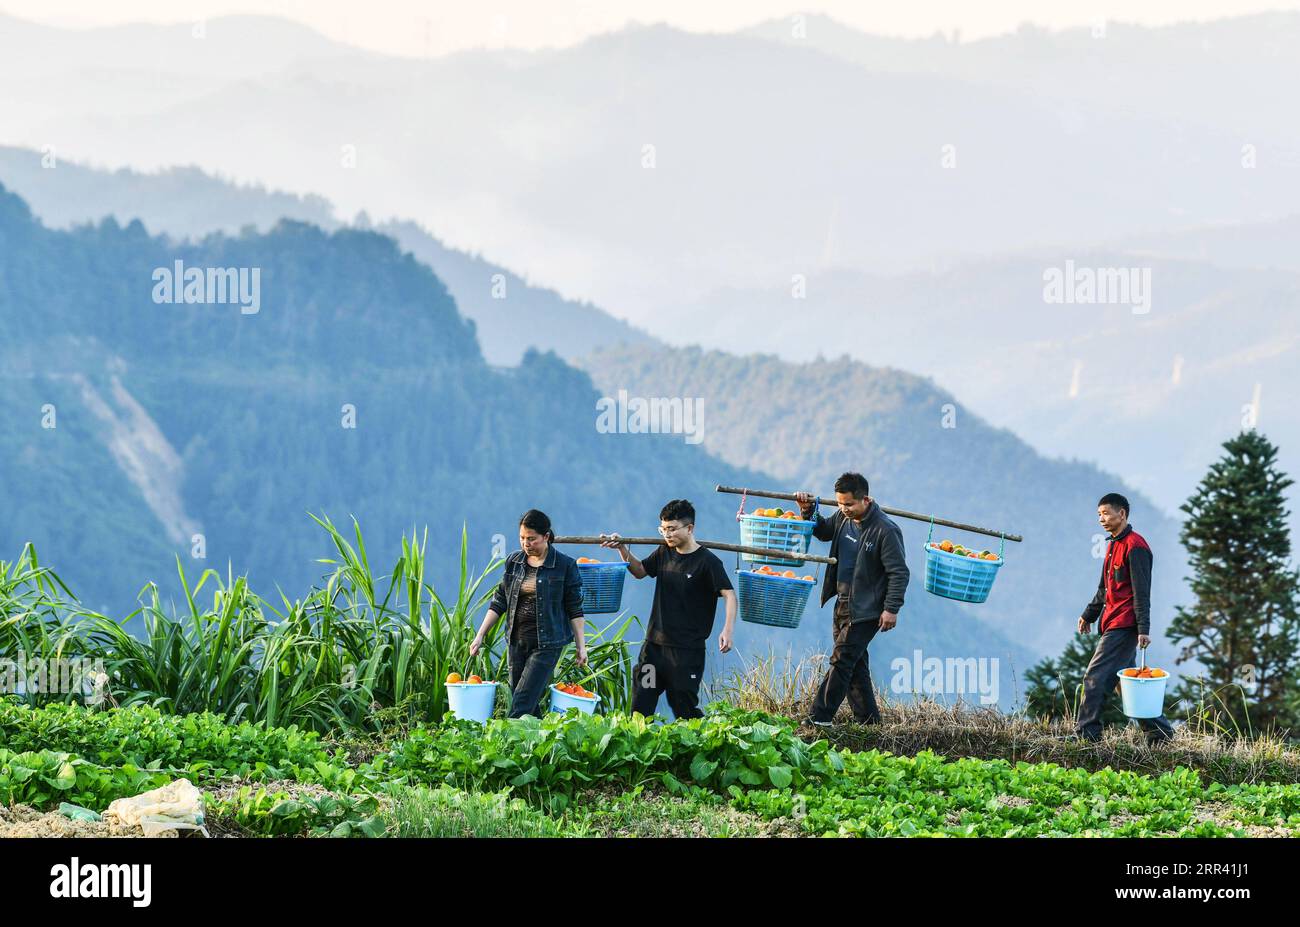 201117 -- BEIJING, Nov. 17, 2020 -- Liu Ying 1st L, He Changle 2nd L and village officers help carry melons planted by villagers in Dongqin Village, Congjiang County of southwest China s Guizhou Province, Nov. 11, 2020. Located in the area of the Yueliang Mountain, Congjiang County is one of the nine counties in Guizhou that still fight against poverty. After graduating from college, He Changle, joined his mother Liu Ying, became poverty relief assistant in Dongqin Village of Congjiang County at the end of 2019. They help and encourage each other in work and become models in the poverty relief Stock Photo